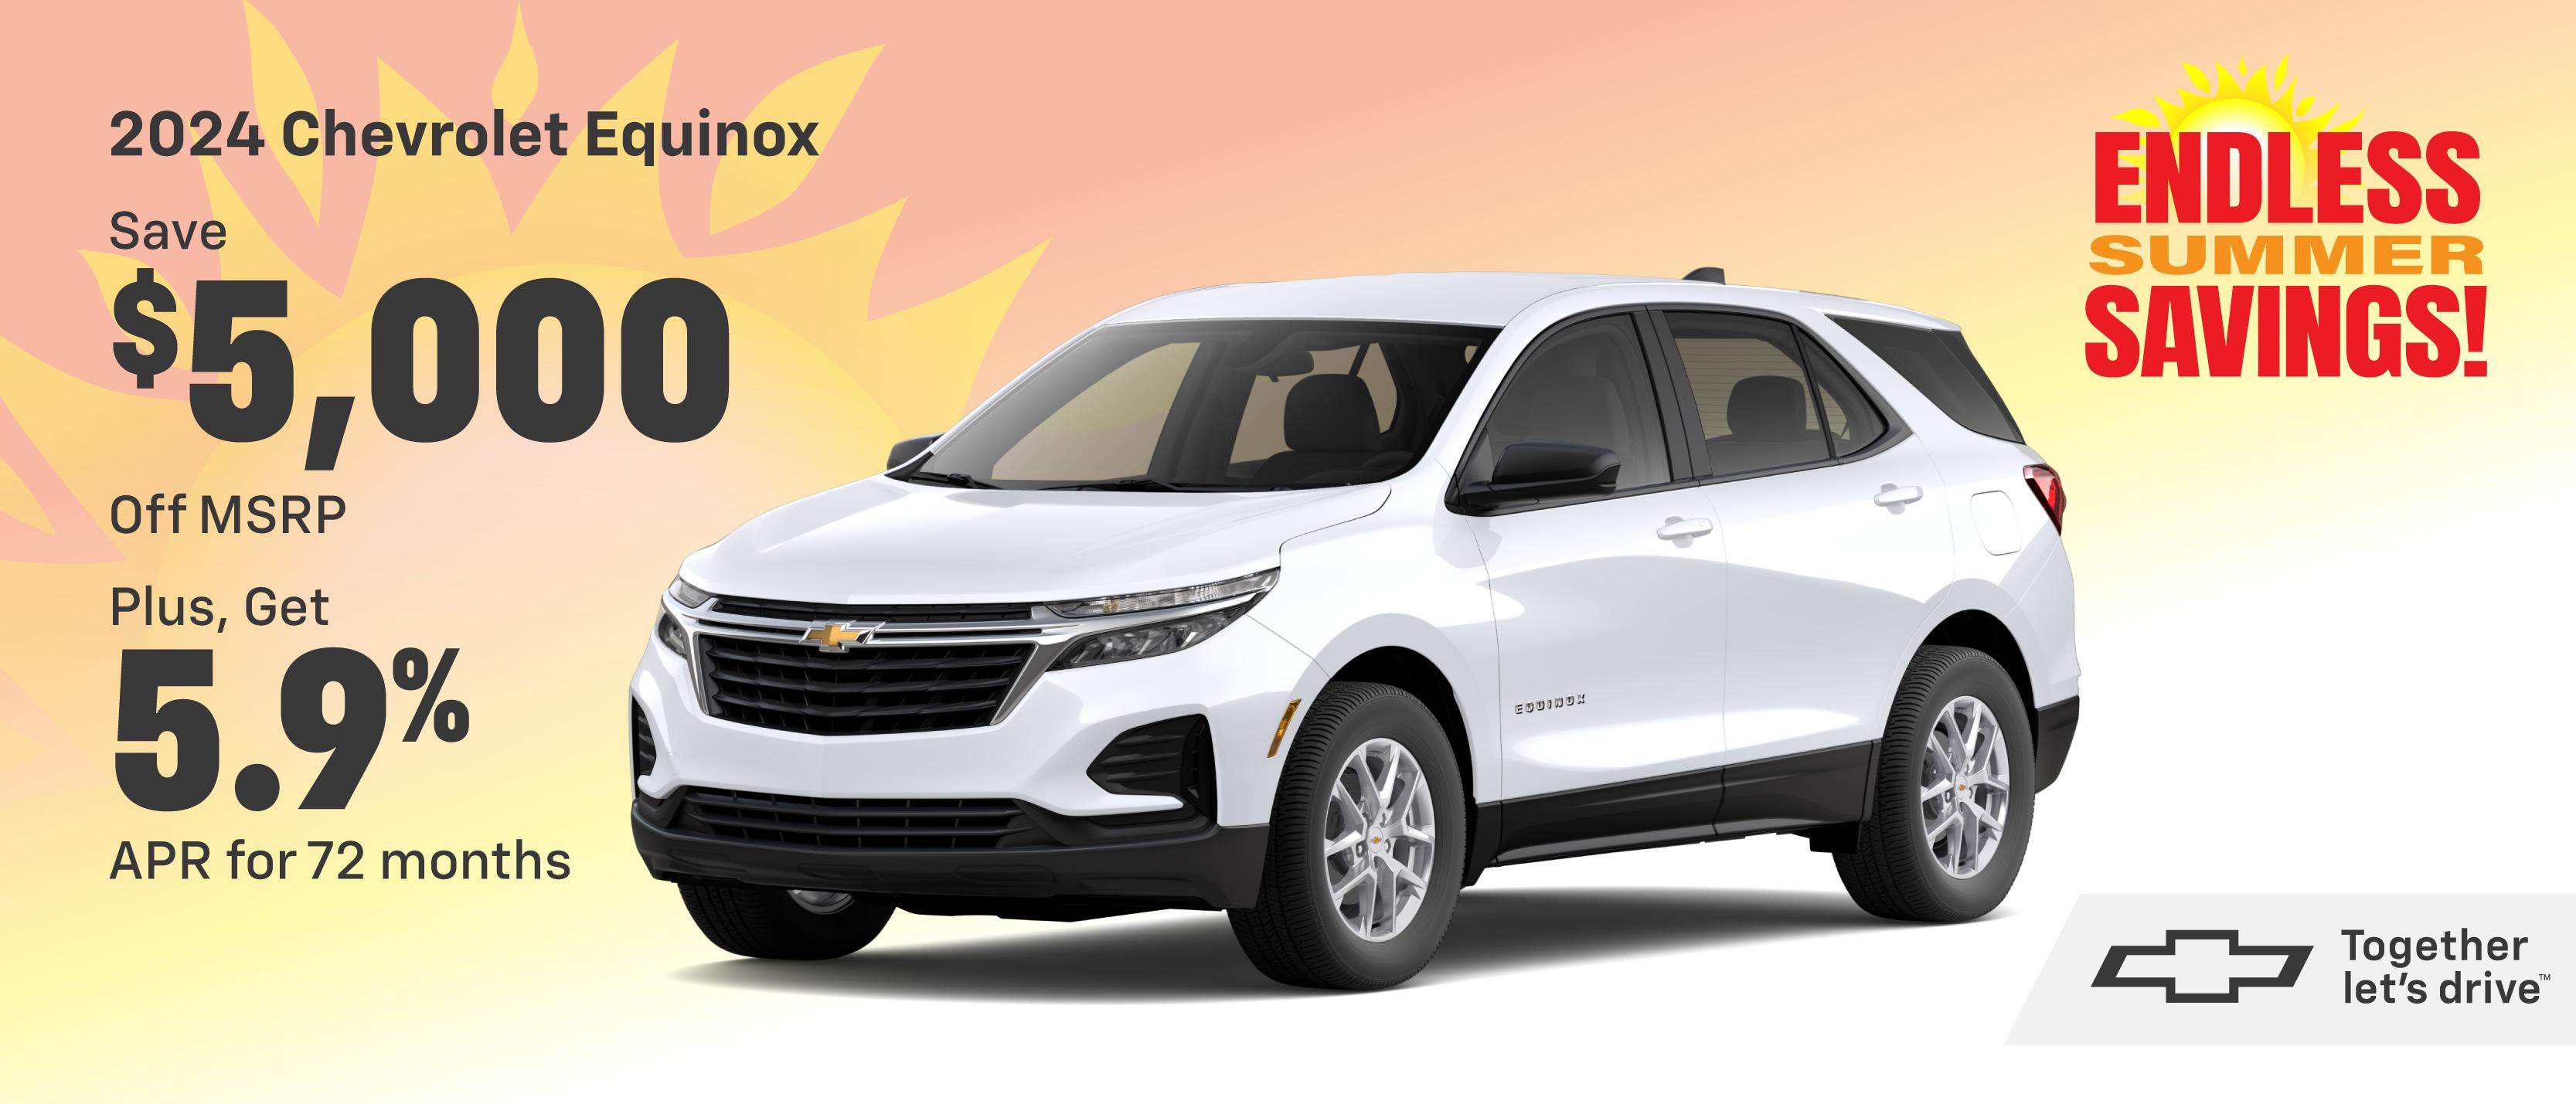 Shop $5,000 Off & 5.9% for 72 Months on 2024 Chevy Equinox!🔥🔥